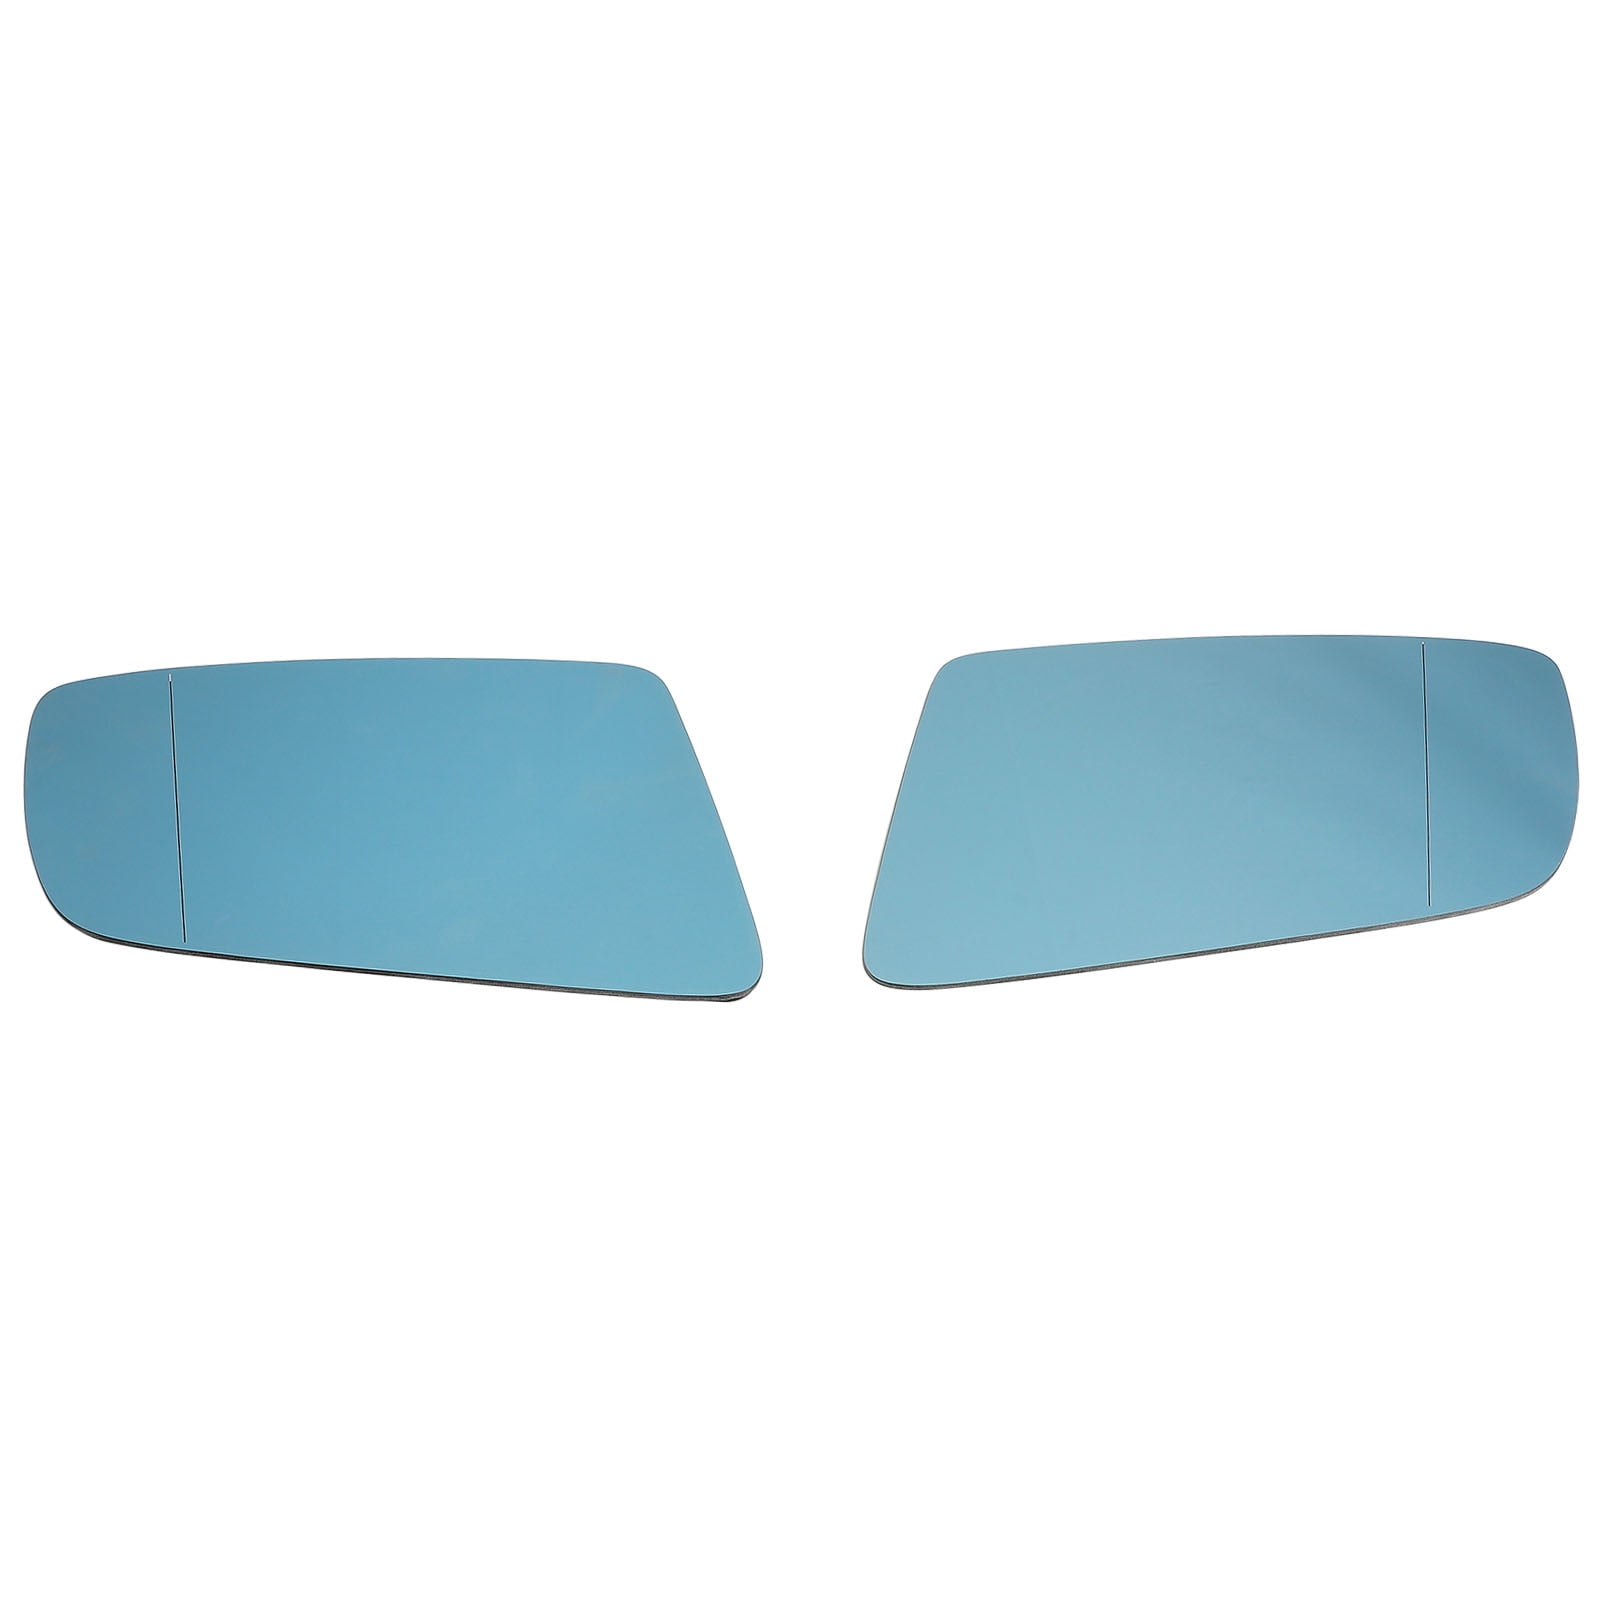 BMW 3 BMW 5 LEFT RIGHT WING MIRROR GLASS BLUE ASPHERICAL ds 